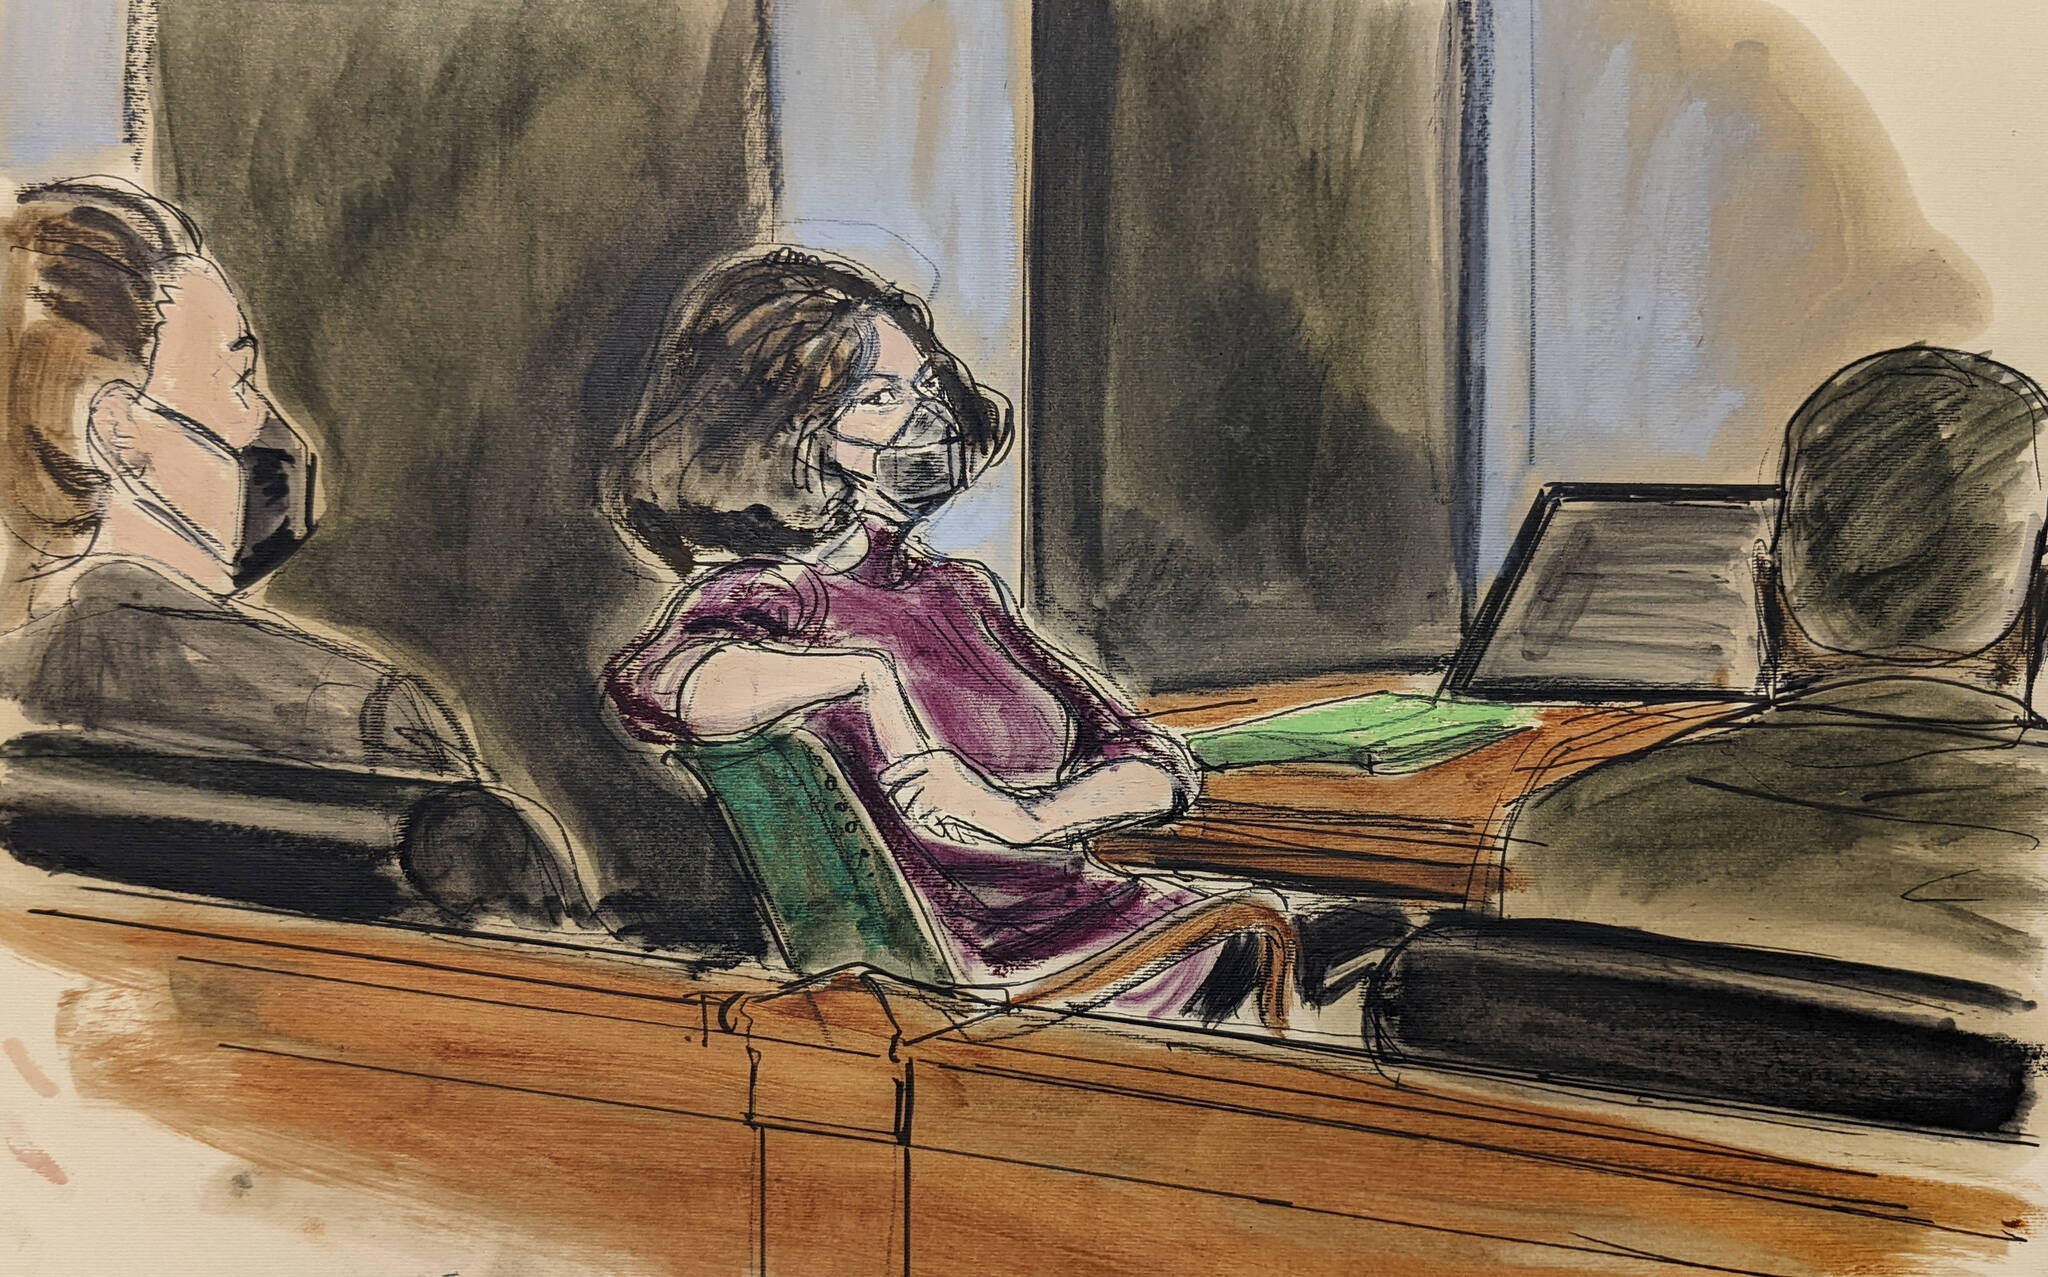 AP Photo / Elizabeth Williams
In this courtroom sketch, Ghislaine Maxwell, center, sits in the courtroom Wednesday during a discussion about a note from the jury during her sex trafficking trial in New York.